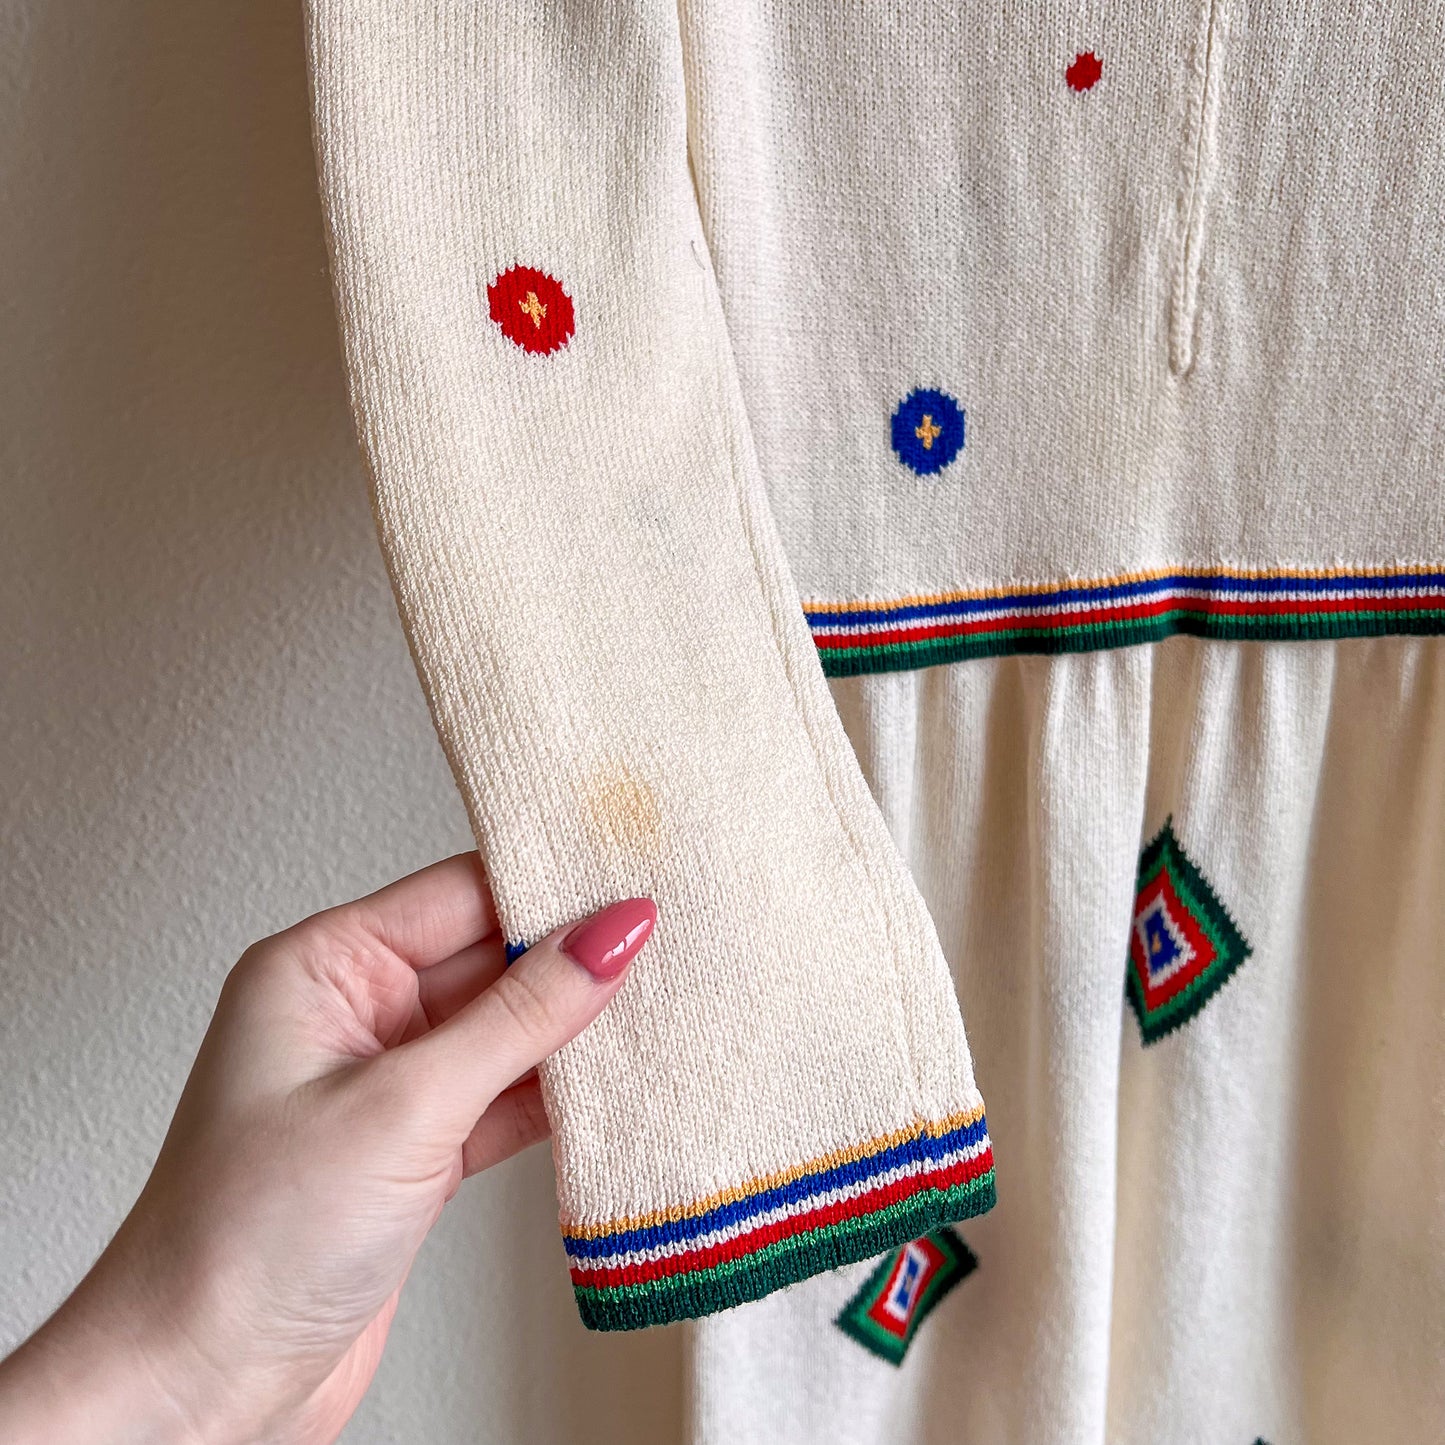 1980s Ivory Sweater Dress With Red and Blue Appliqué (XS/S)